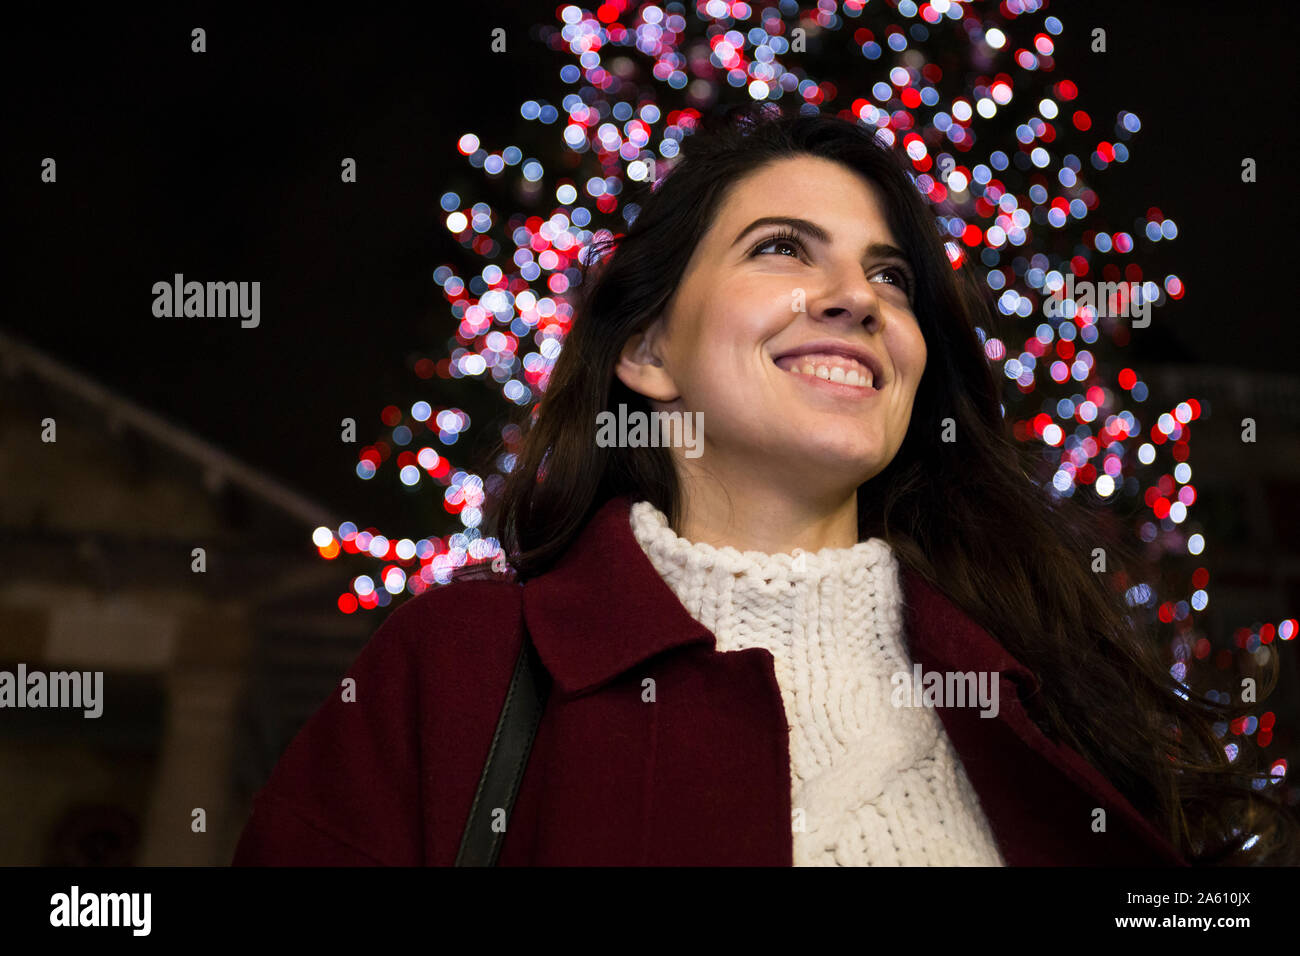 Portrait of happy young woman in front of lighted Christmas tree outdoors Stock Photo